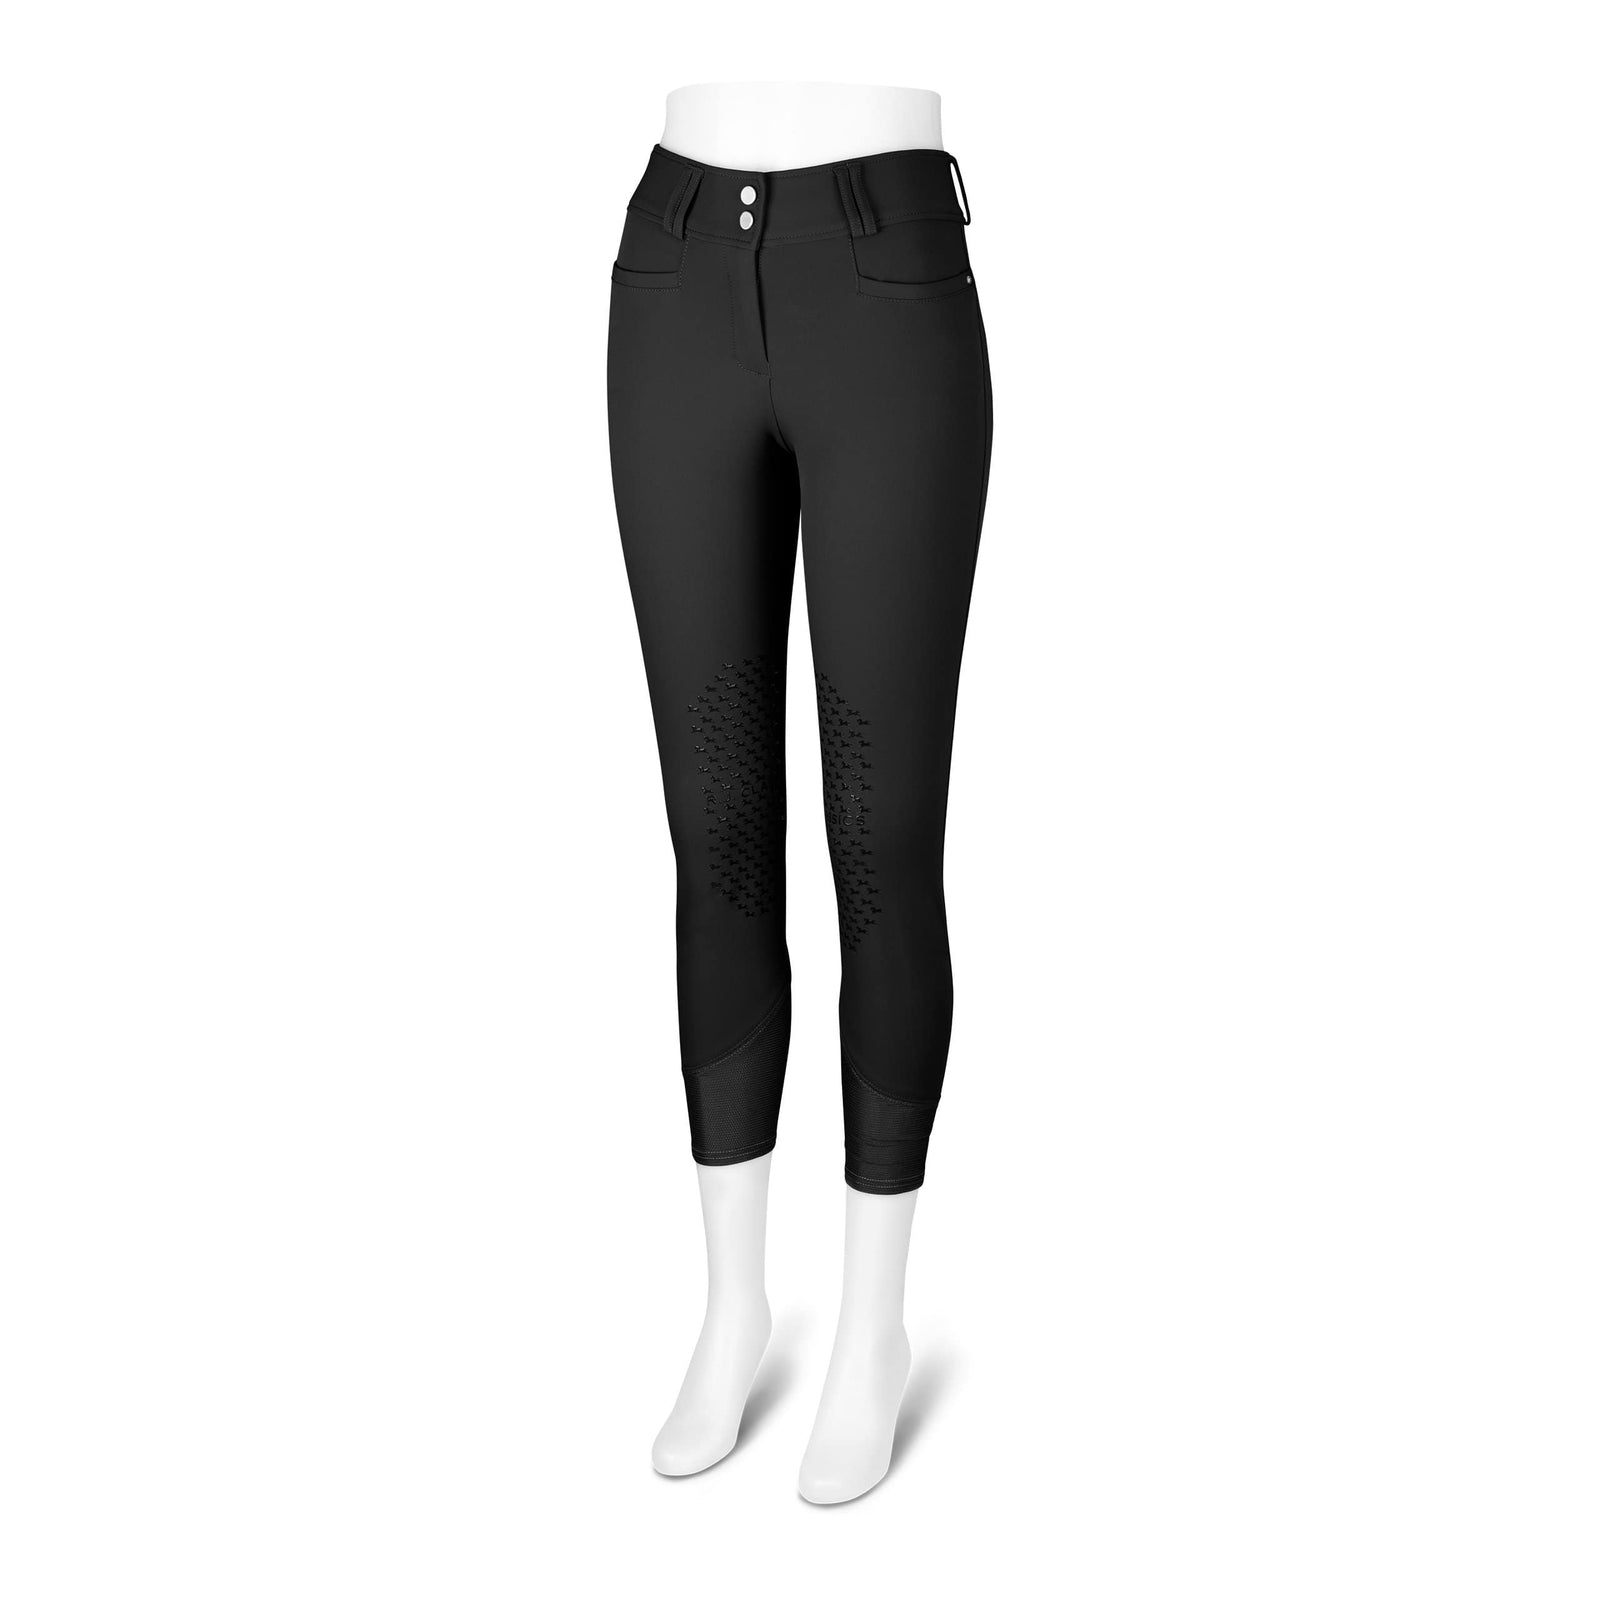 Royal Ride J Technical Riding Breeches With Cavalliera Silicone Knee Pad -  Horse Shop - Horse Riding